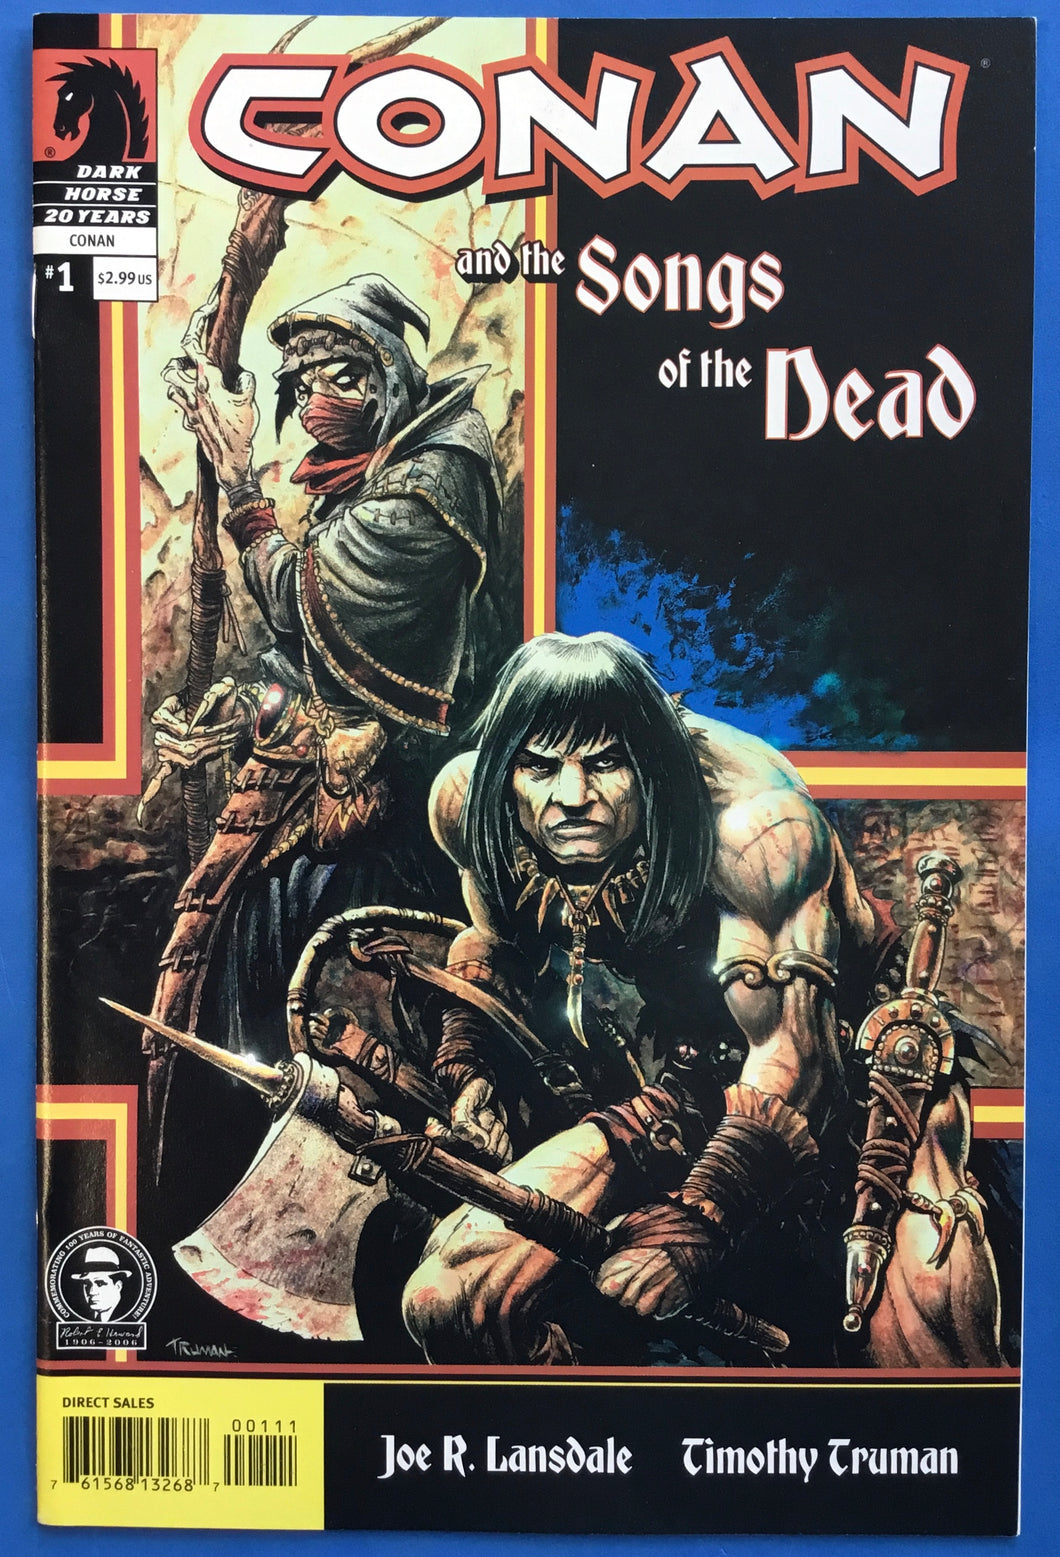 Conan and the Songs of the Dead No. #1 2006 Dark Horse Comics